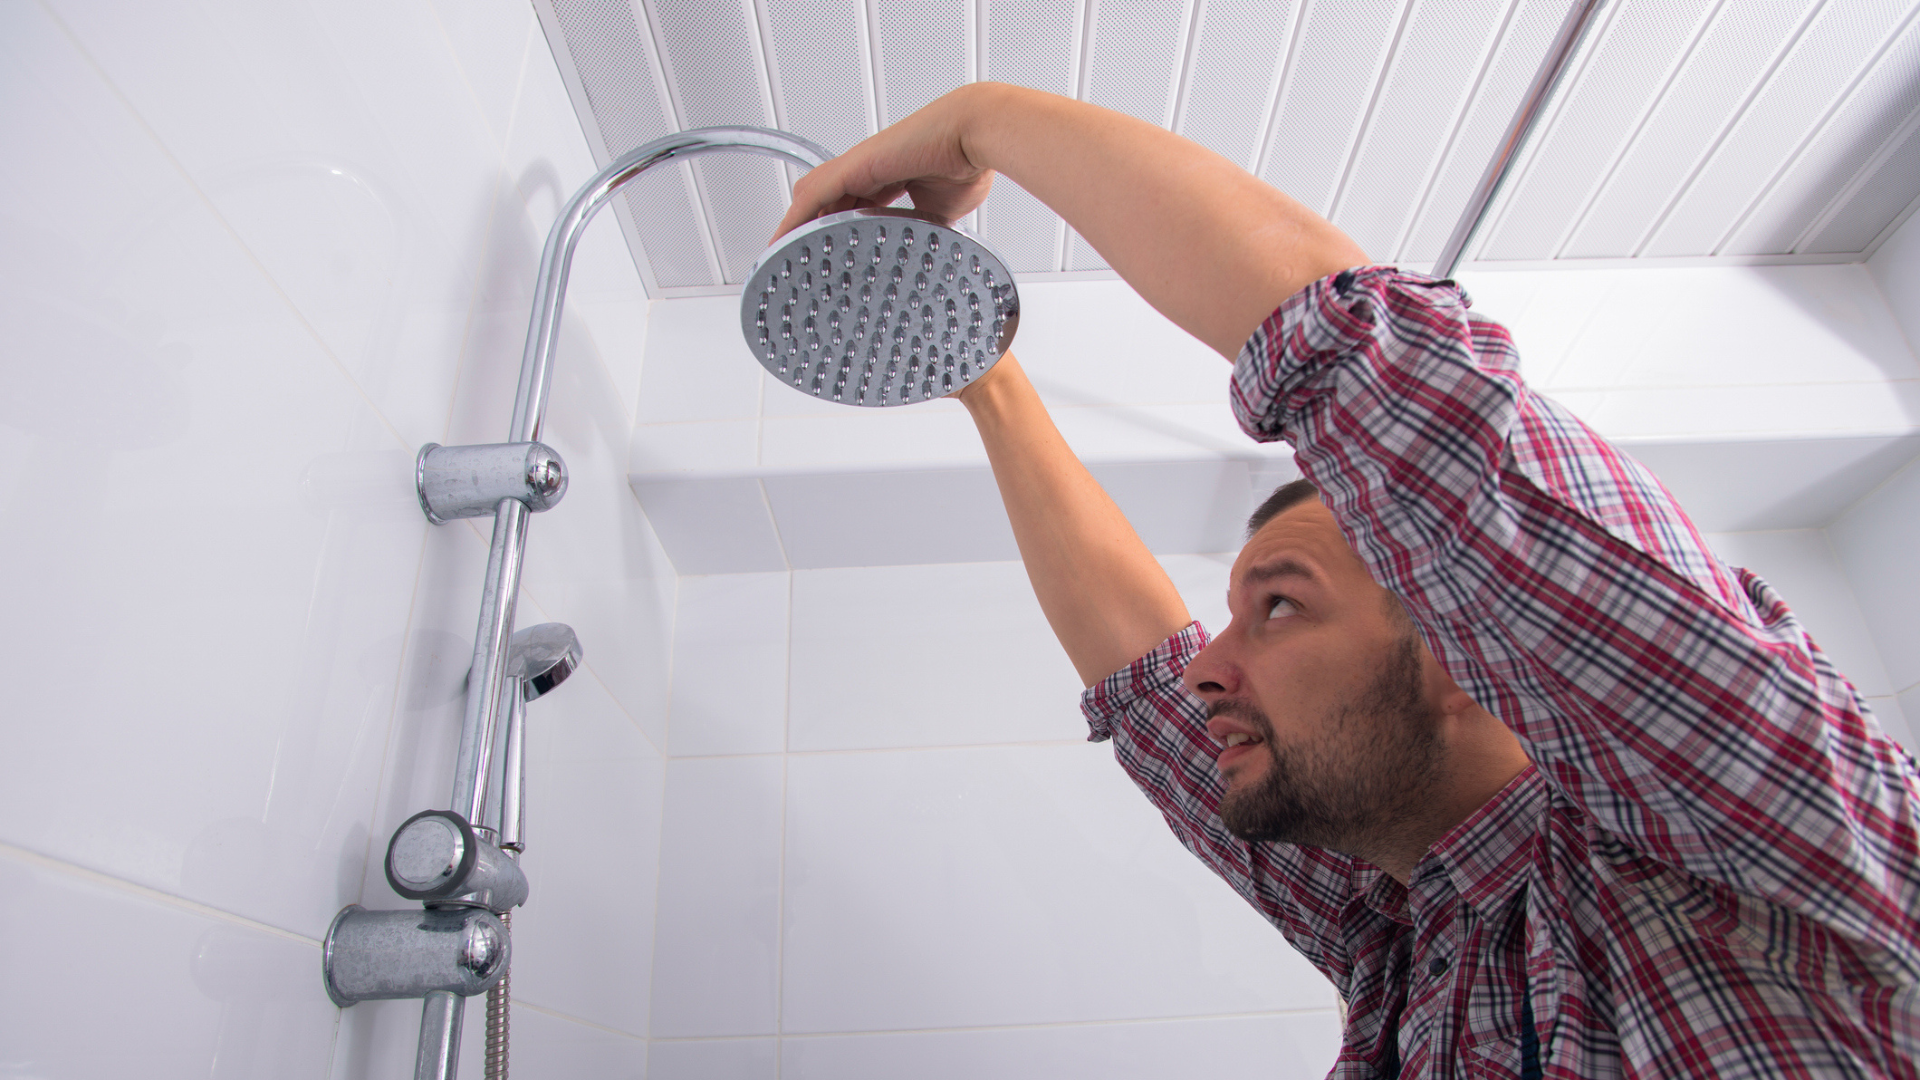 Find More Shower Heads Information about Bathroom Accessories